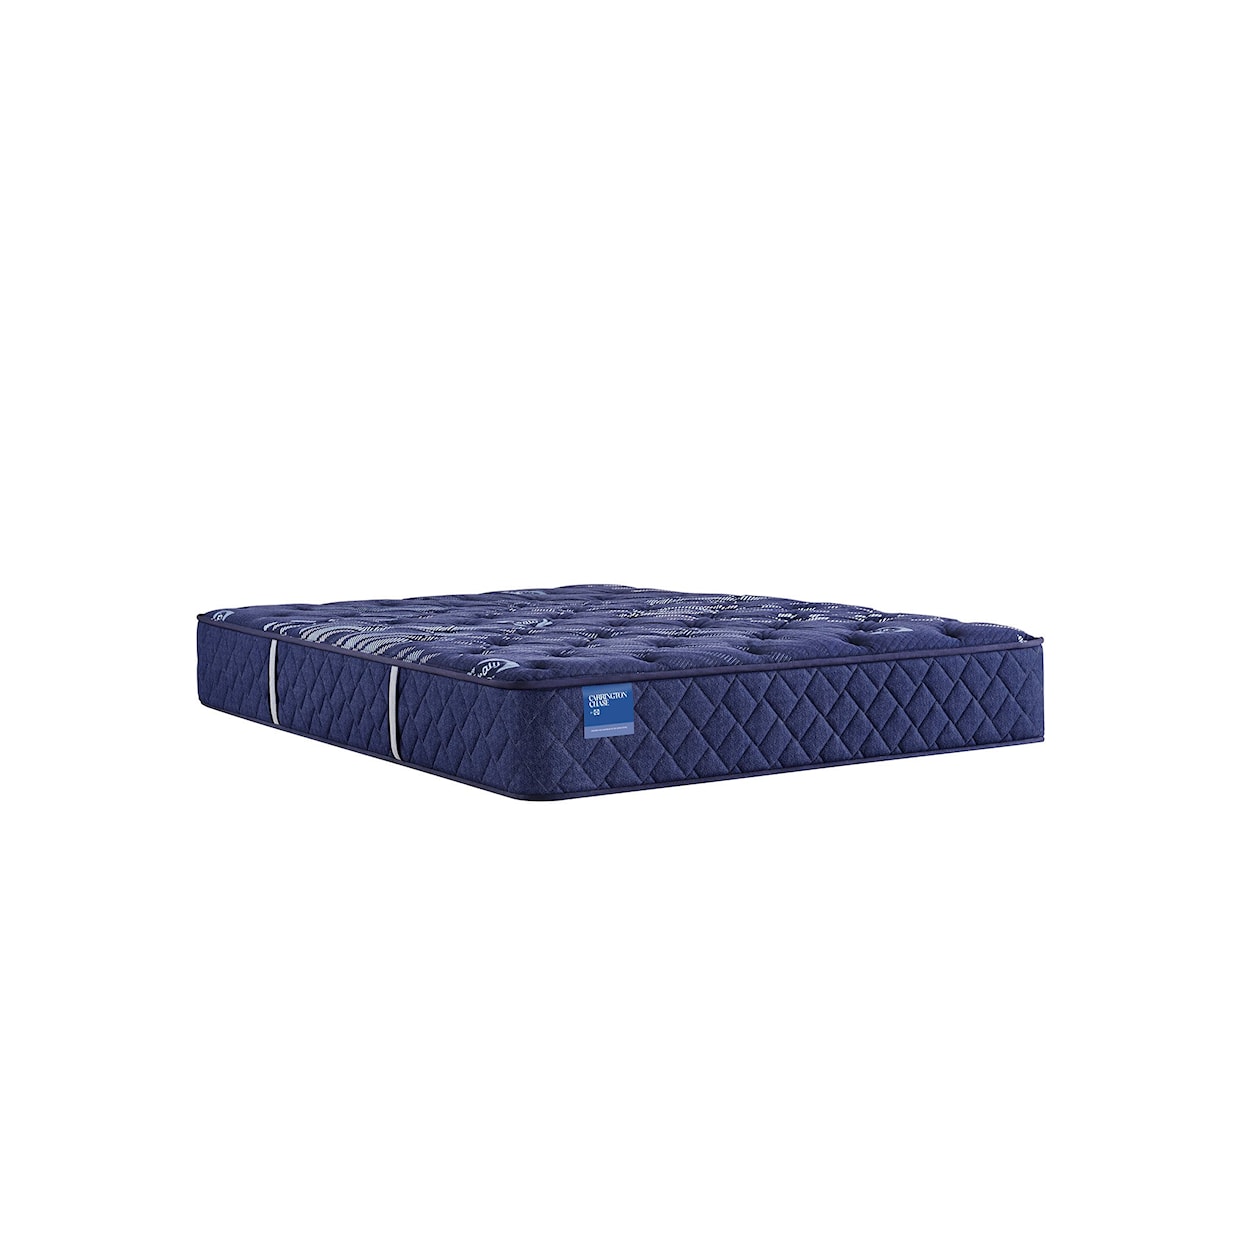 Sealy Carrington Chase S8 Ultra Firm TT Double Mattress